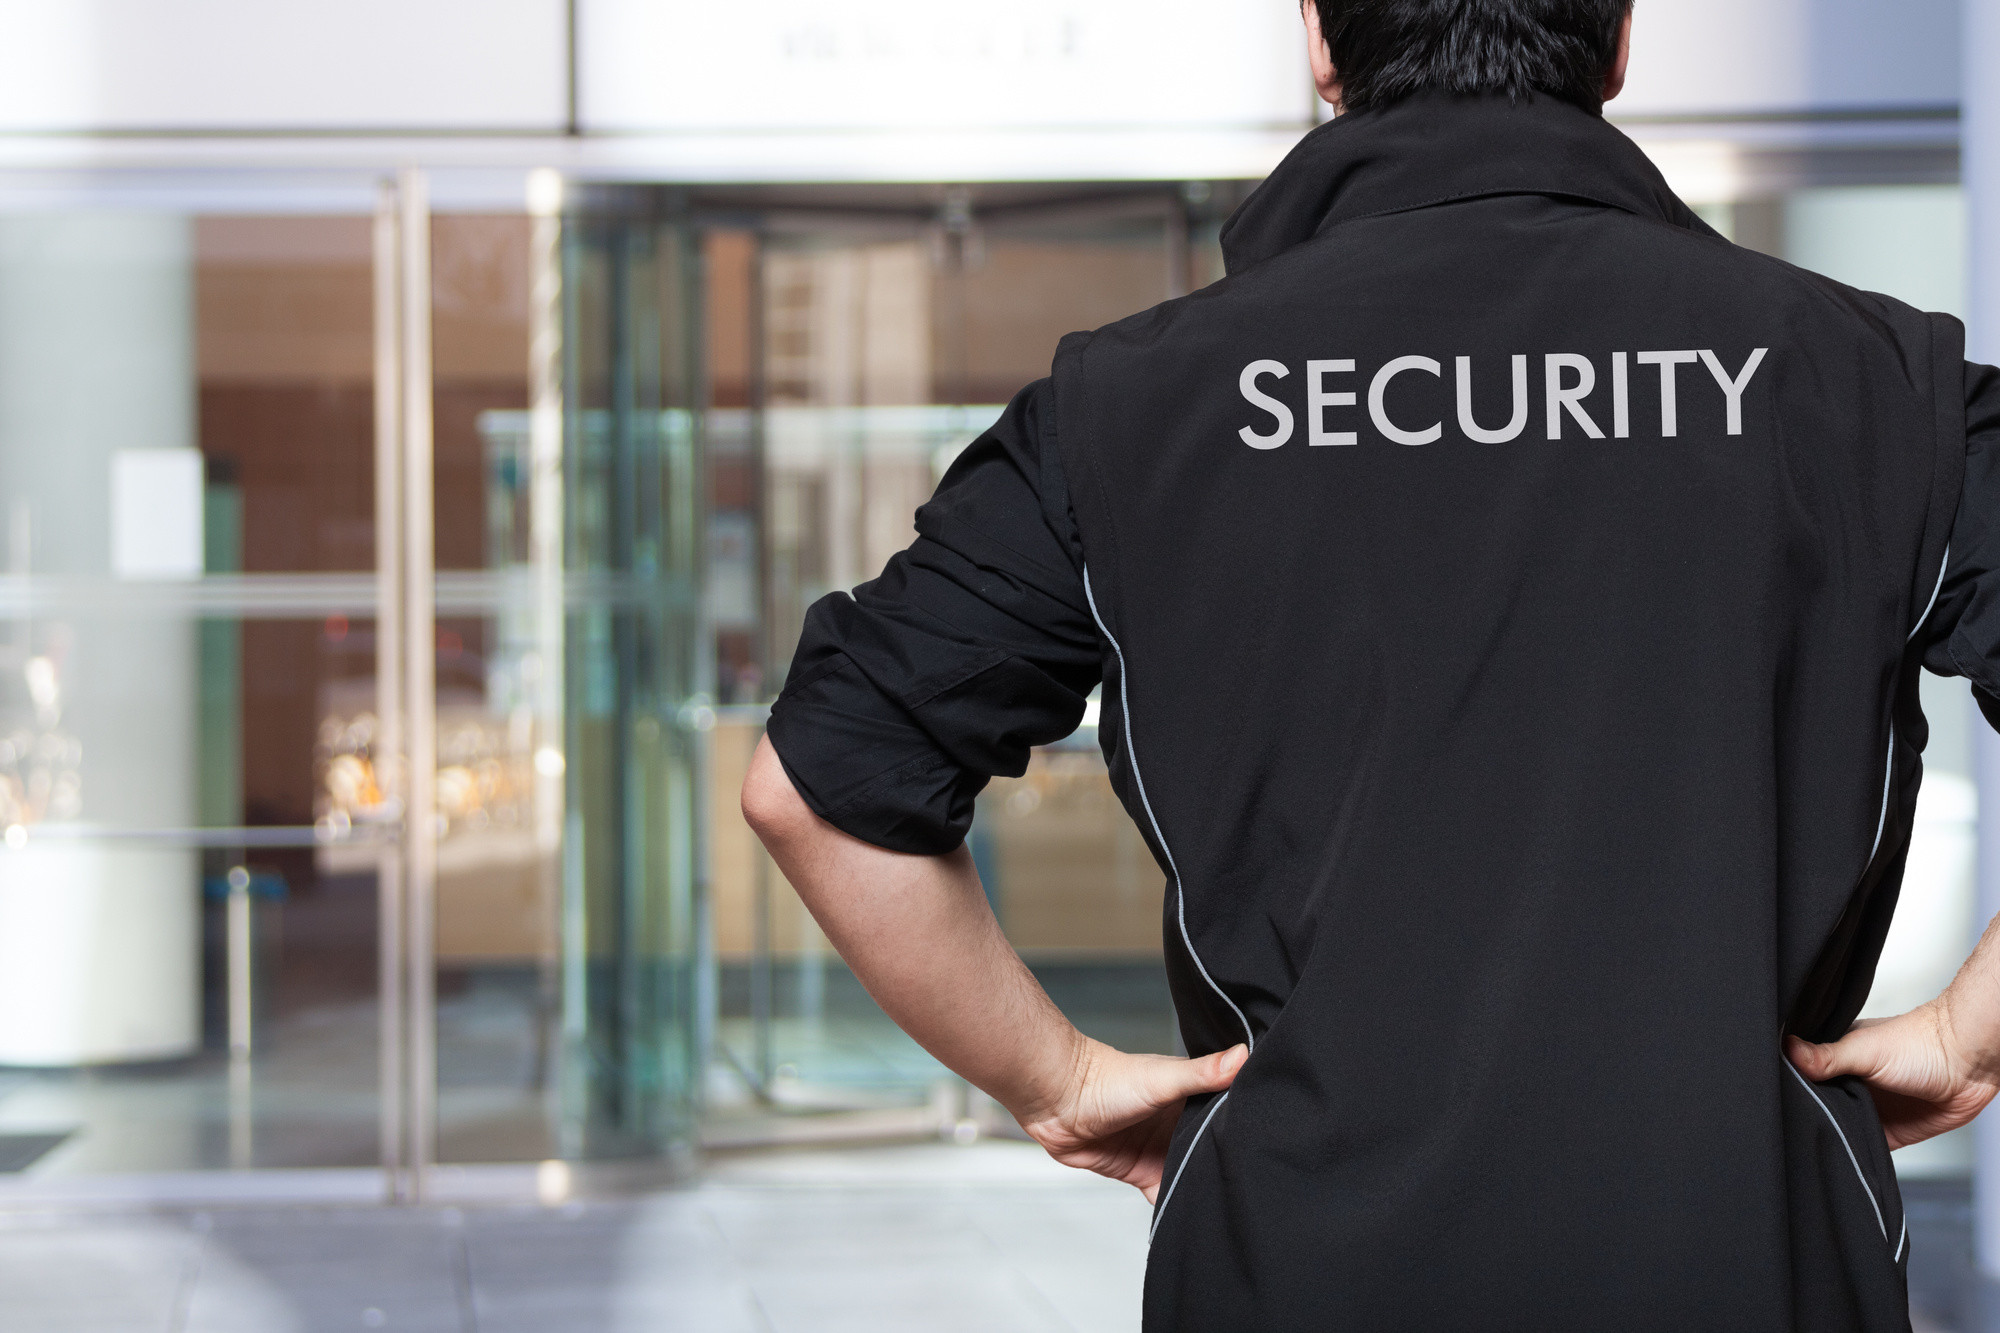 S4SECURITAS PVT LTD - Latest update - SECURITY GUARD SERVICES NEAR ELECTRONIC CITY